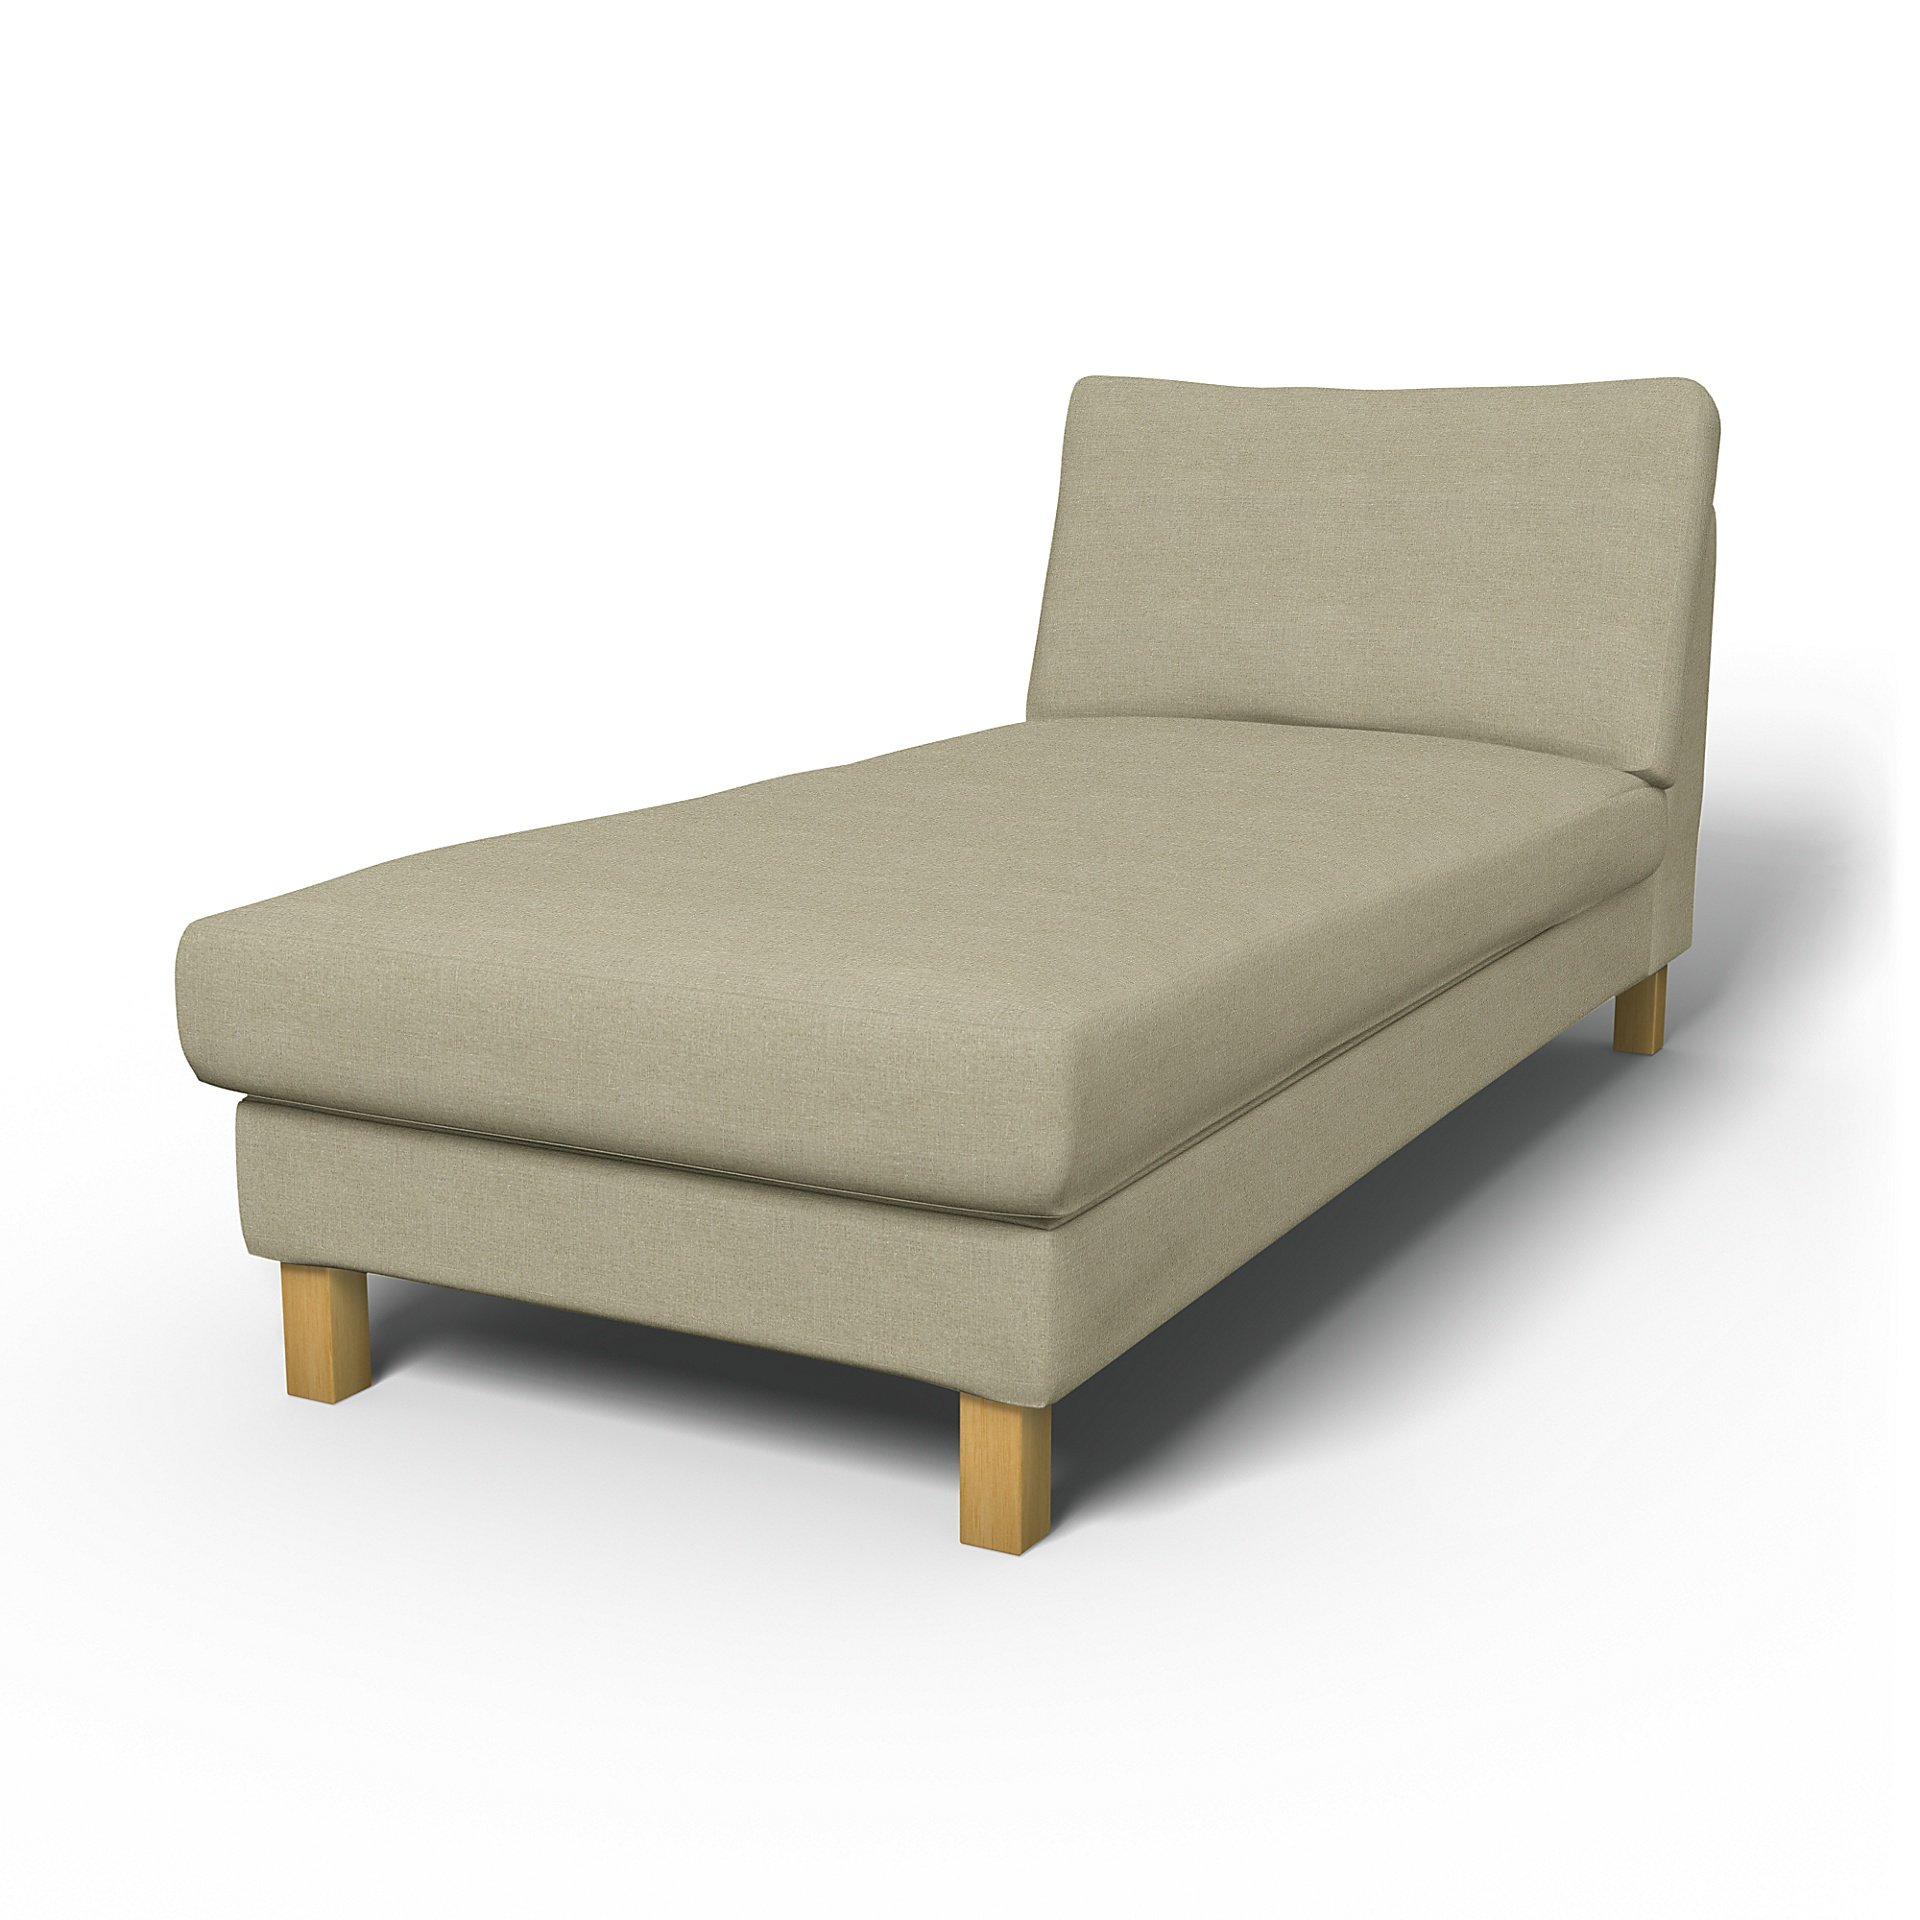 IKEA - Karlstad Stand Alone Chaise Longue Cover, Pebble, Linen - Bemz